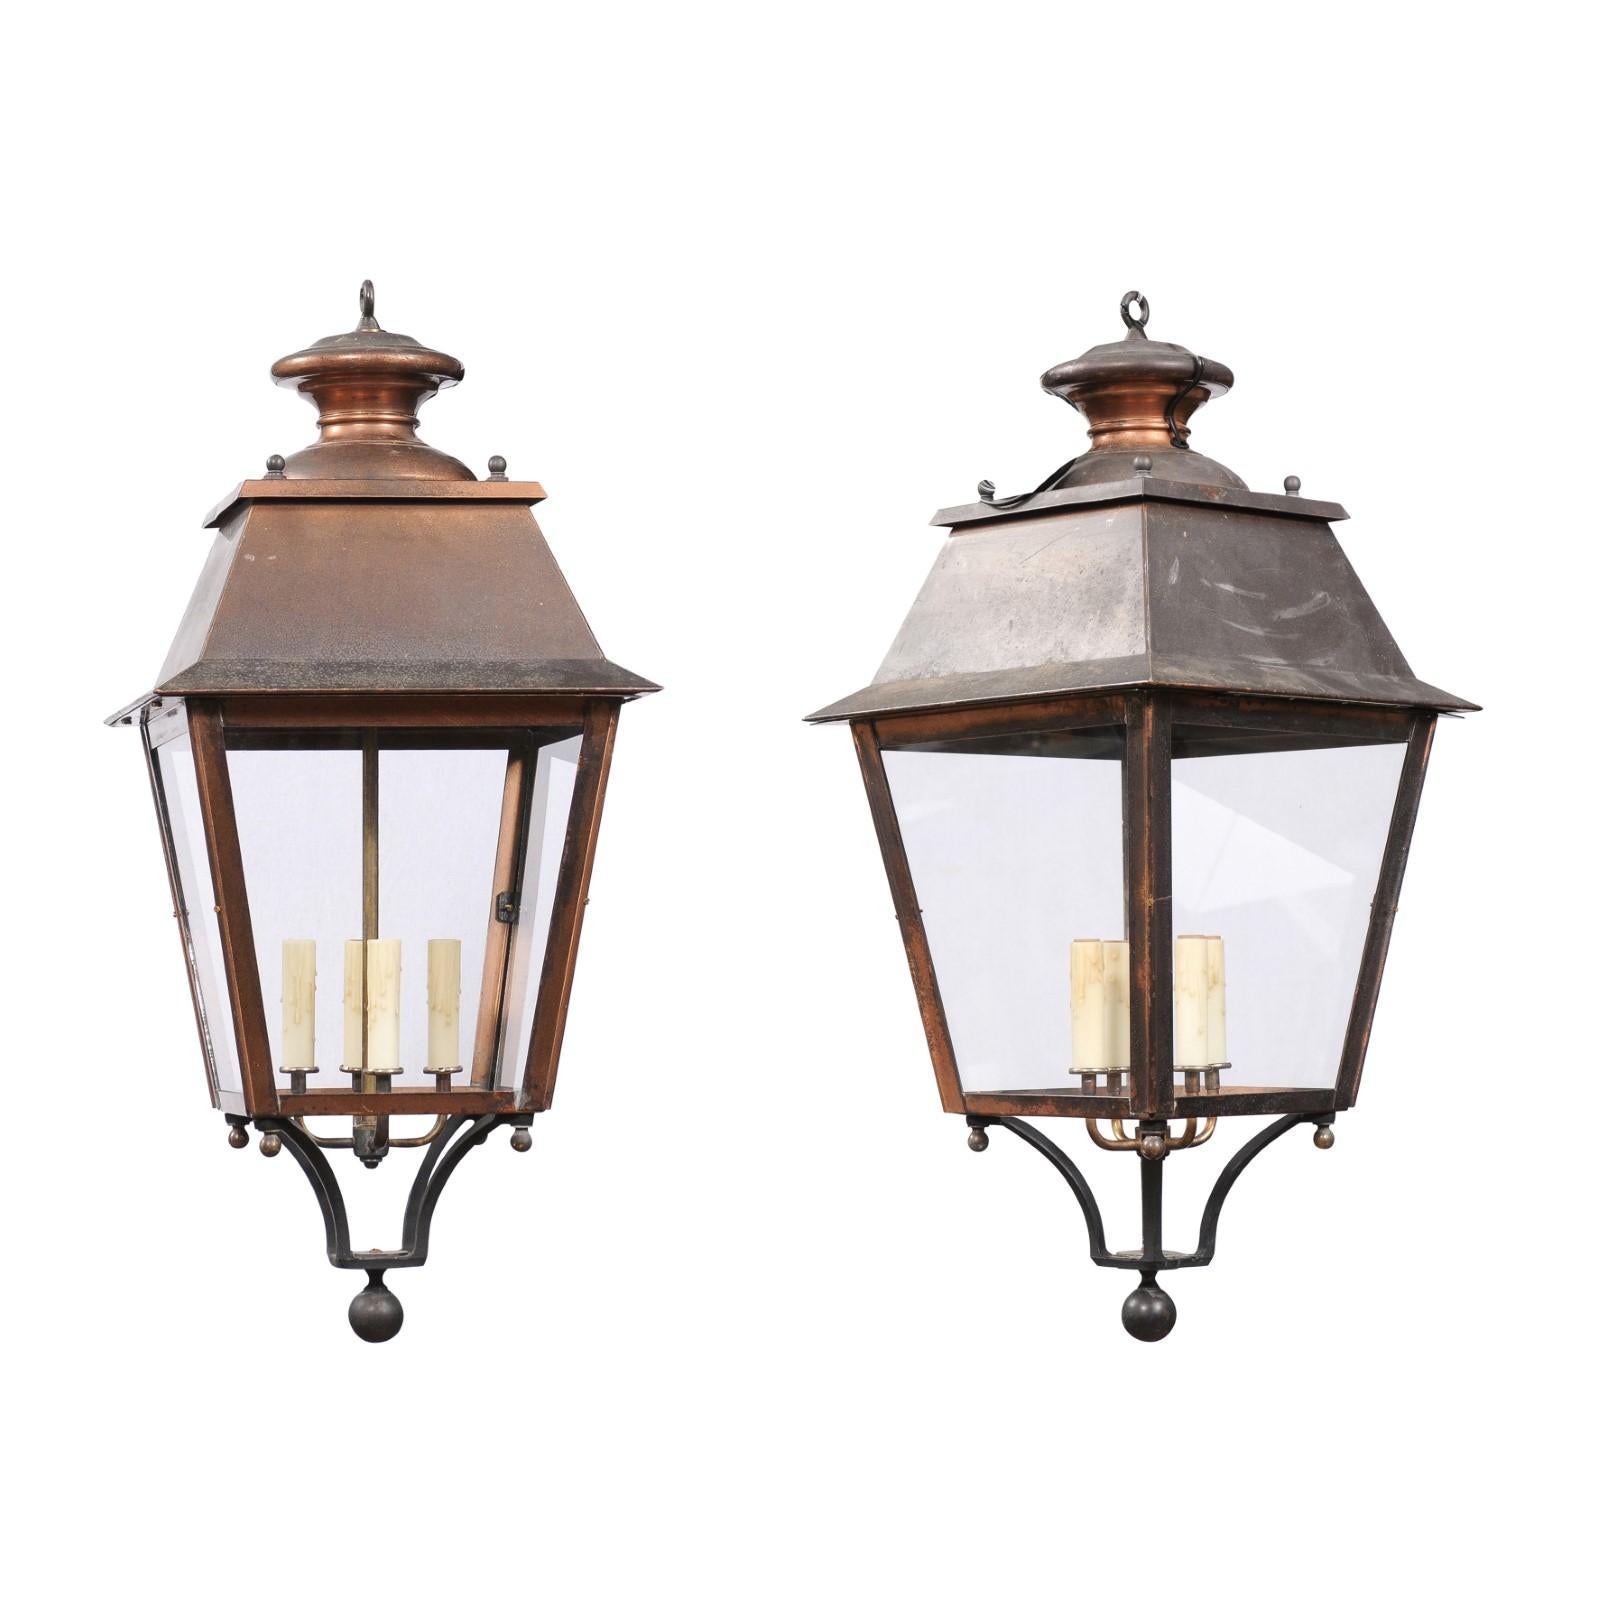 Two French copper lanterns from the 20th century, with four lights, glass panels, petite finial and rustic character. Emanating a warm, rustic charm, these two French copper lanterns from the 20th century are a quintessential blend of classic design